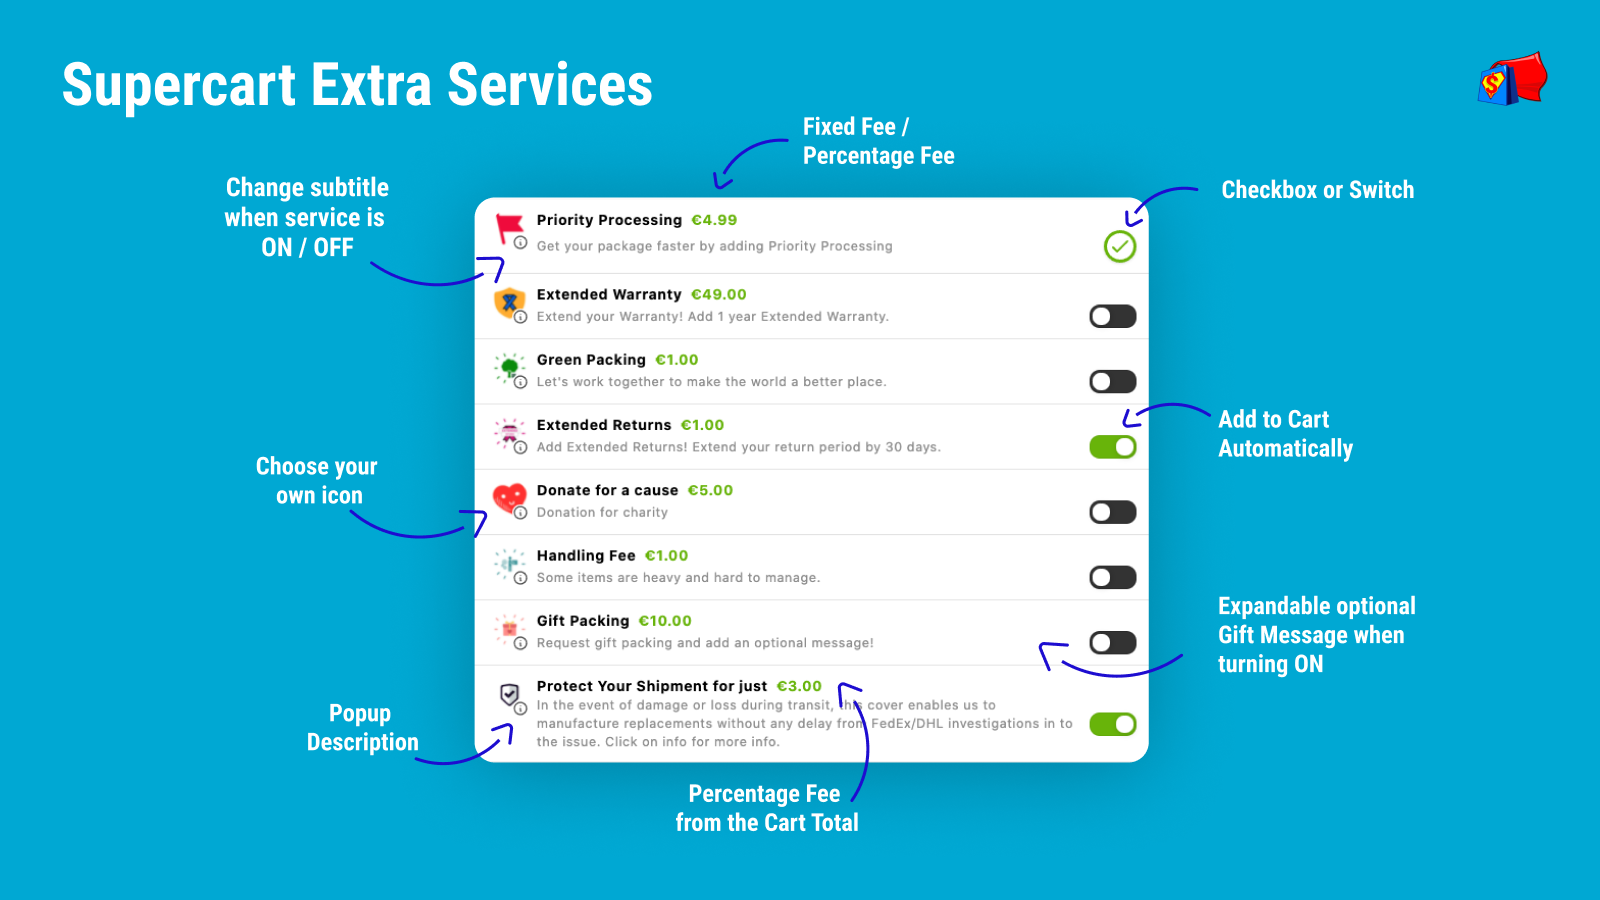 Supercart Extra Services showing all extra services with their features